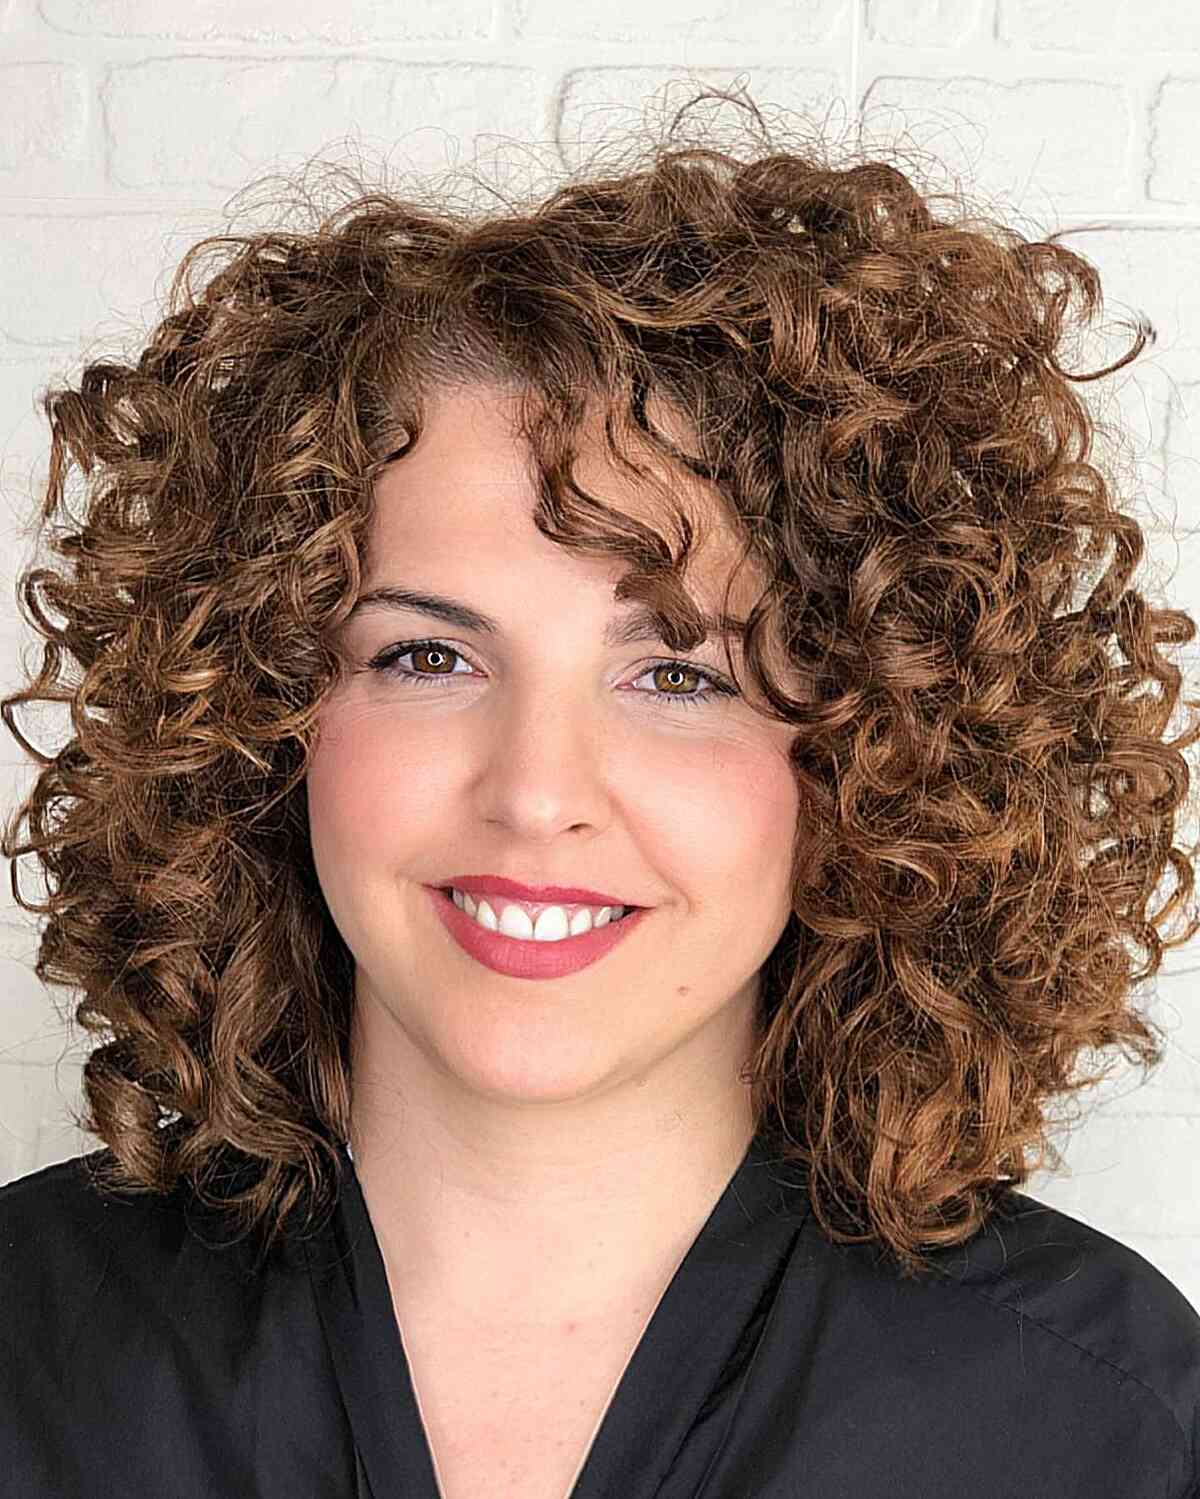 Rezo Cut Curls for Women Over 30 with Round Faces